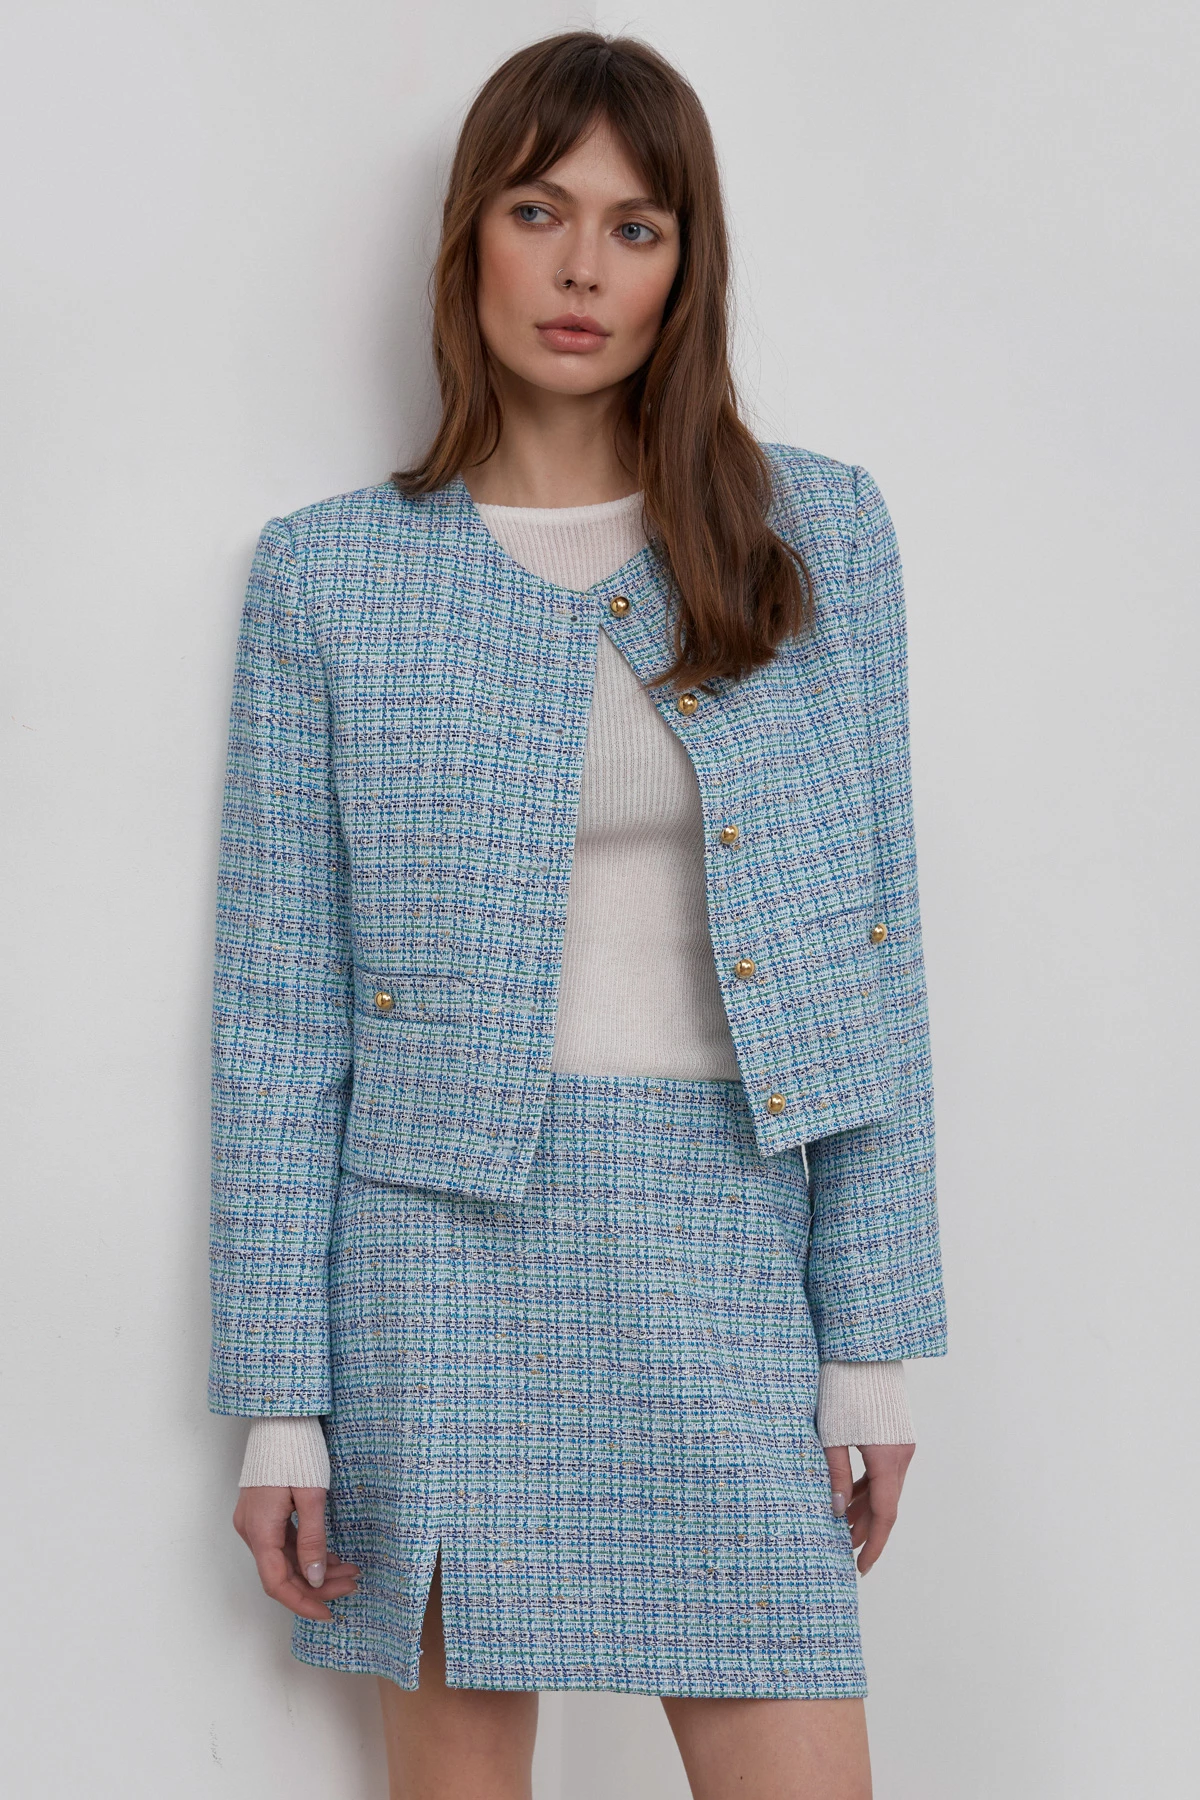 Blue short tweed skirt with cut, photo 1